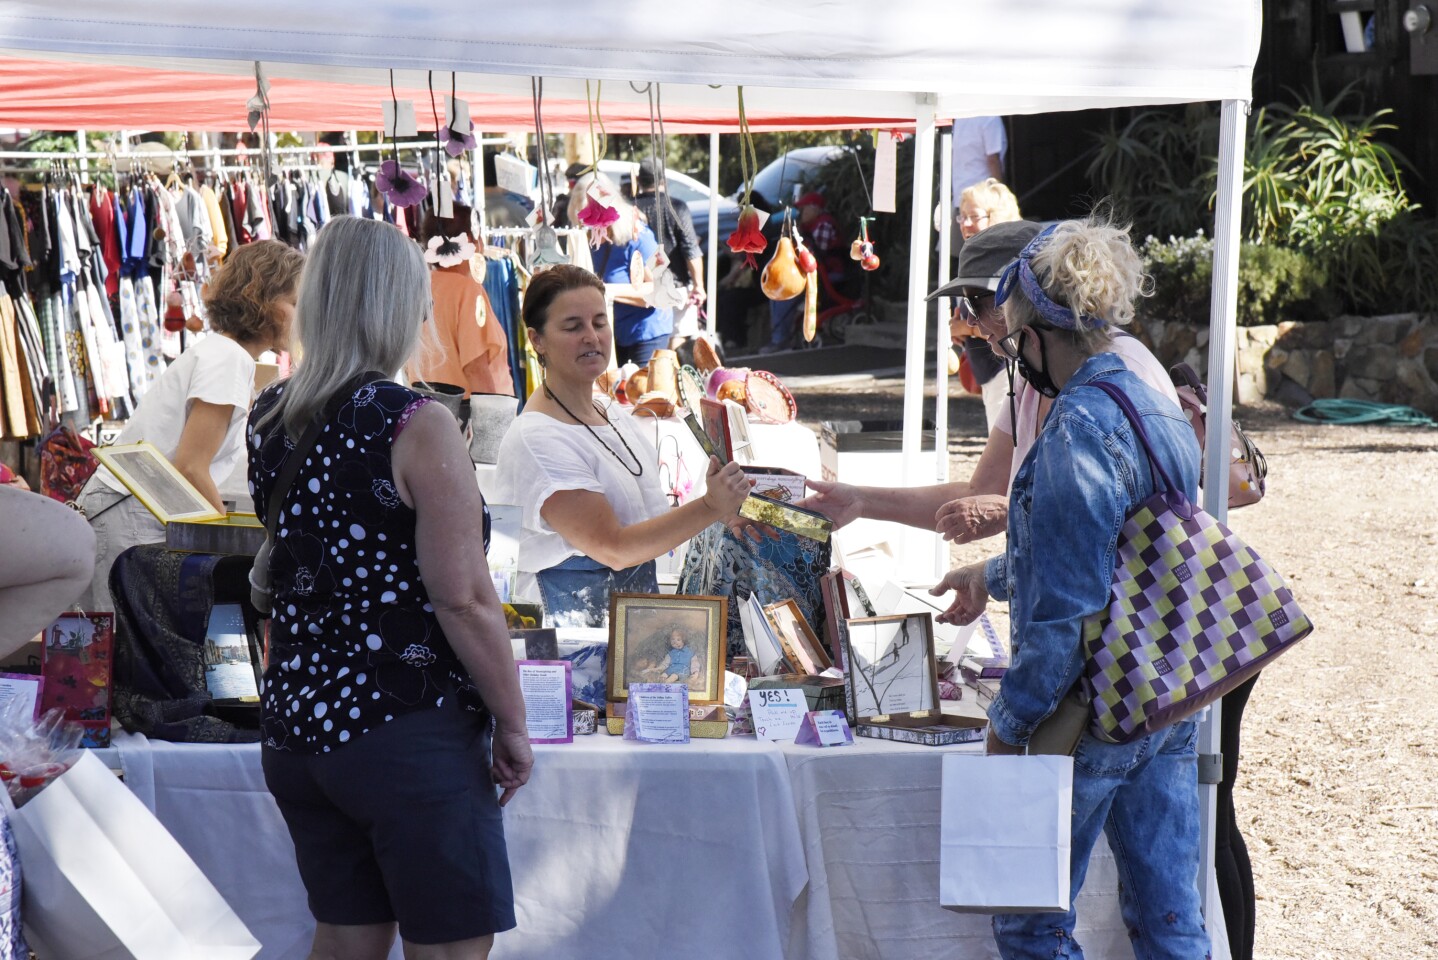 The Fair provides craft artisans an opportunity to show their wares